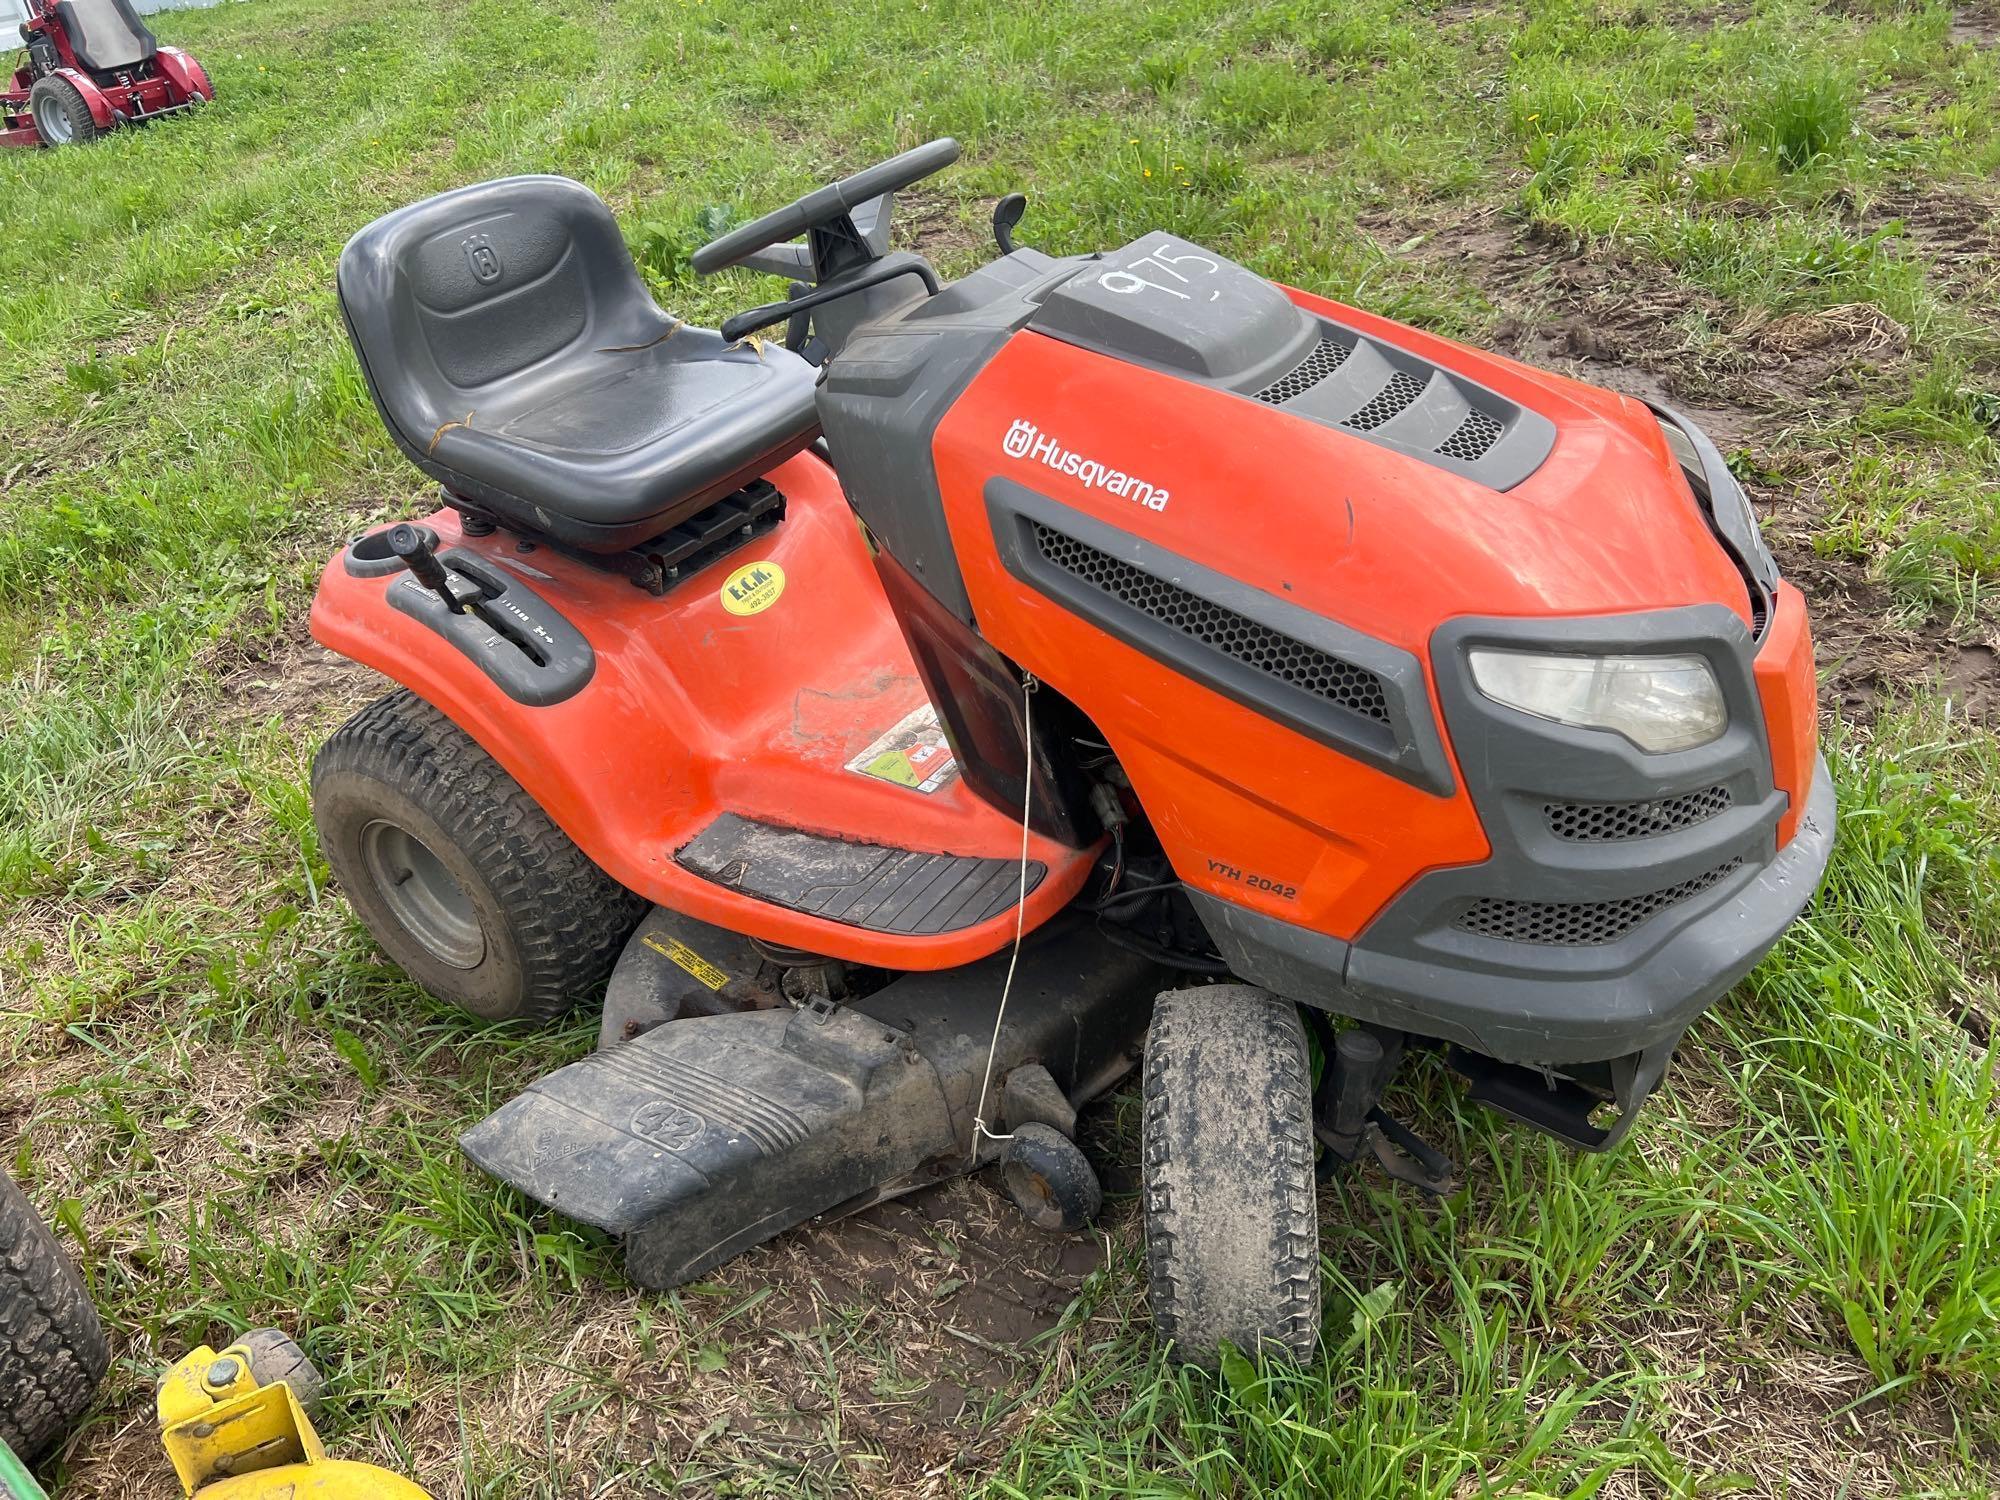 HUSQVARNA YTH2042 LAWN & GARDEN TRACTOR SN-001871 powered by gas engine, equipped with 42in. Cutting